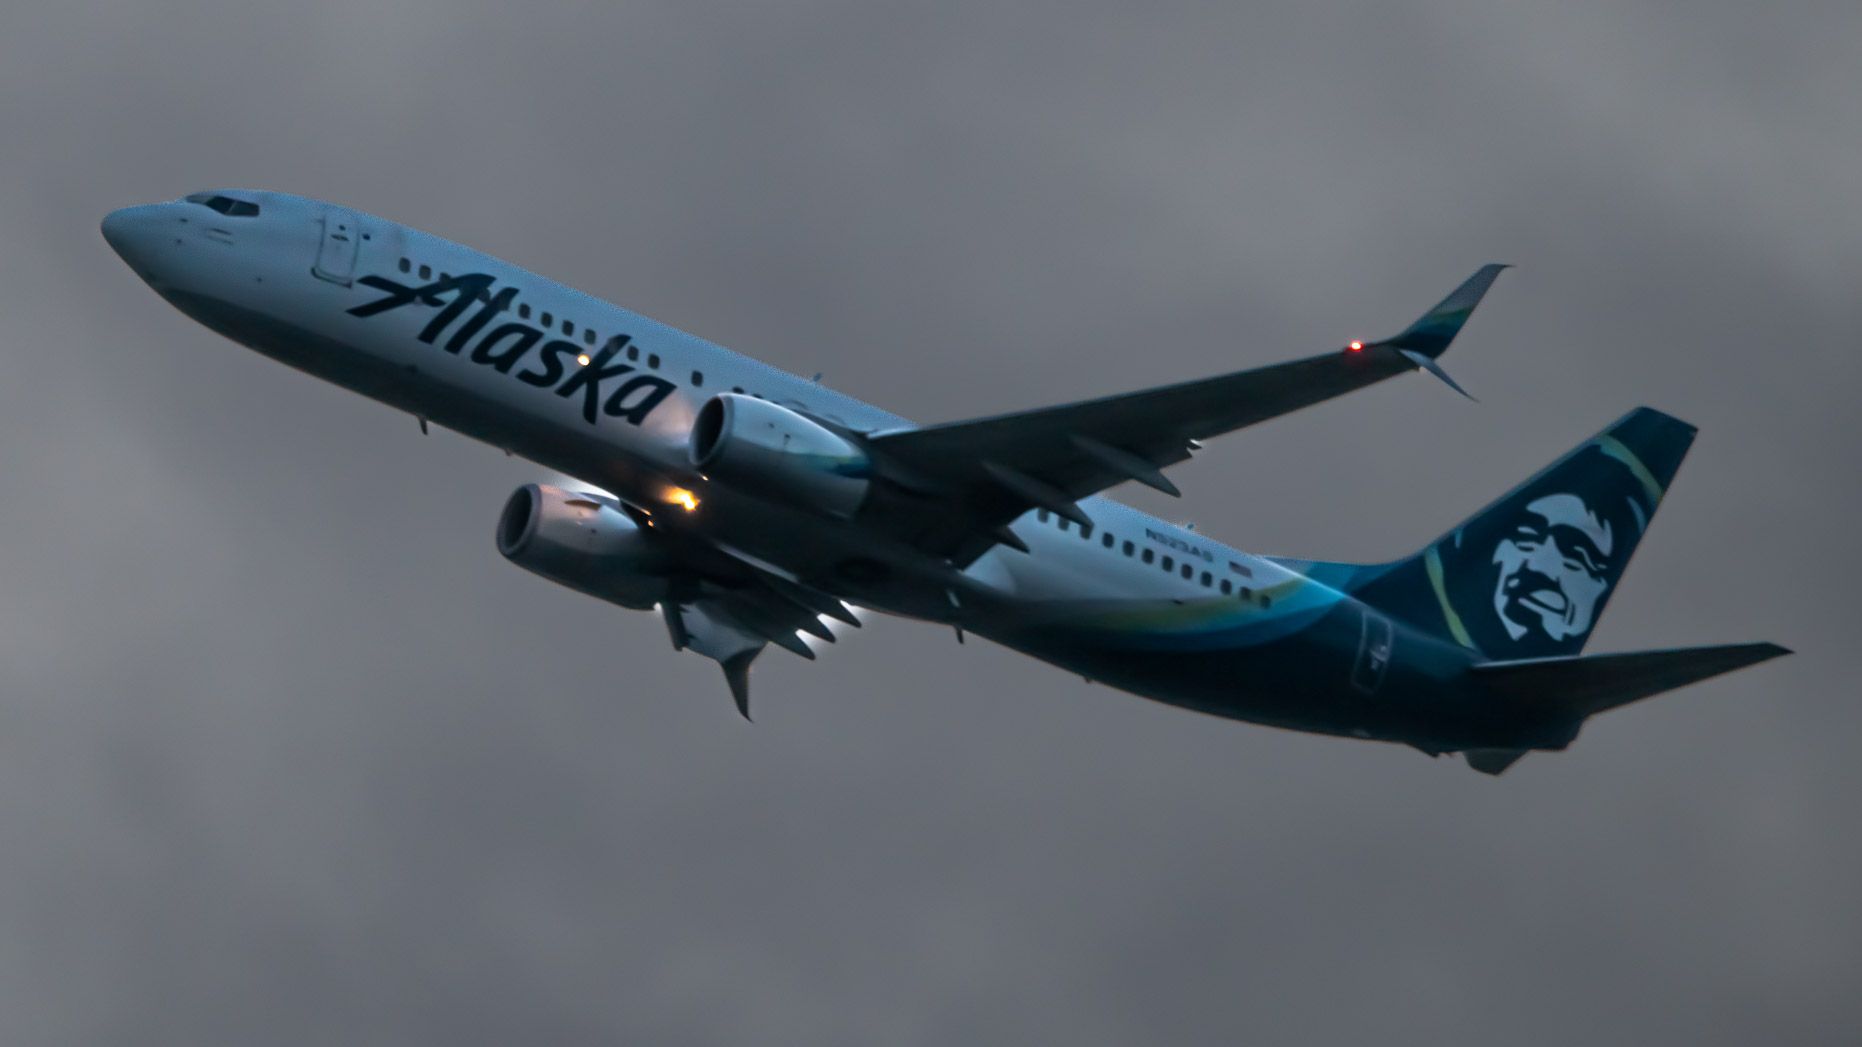 RISING BOEING 737-890(WL) OF ALASKA AIRLINES IN OVERCAST with aircraft beacons on and gear tucked in